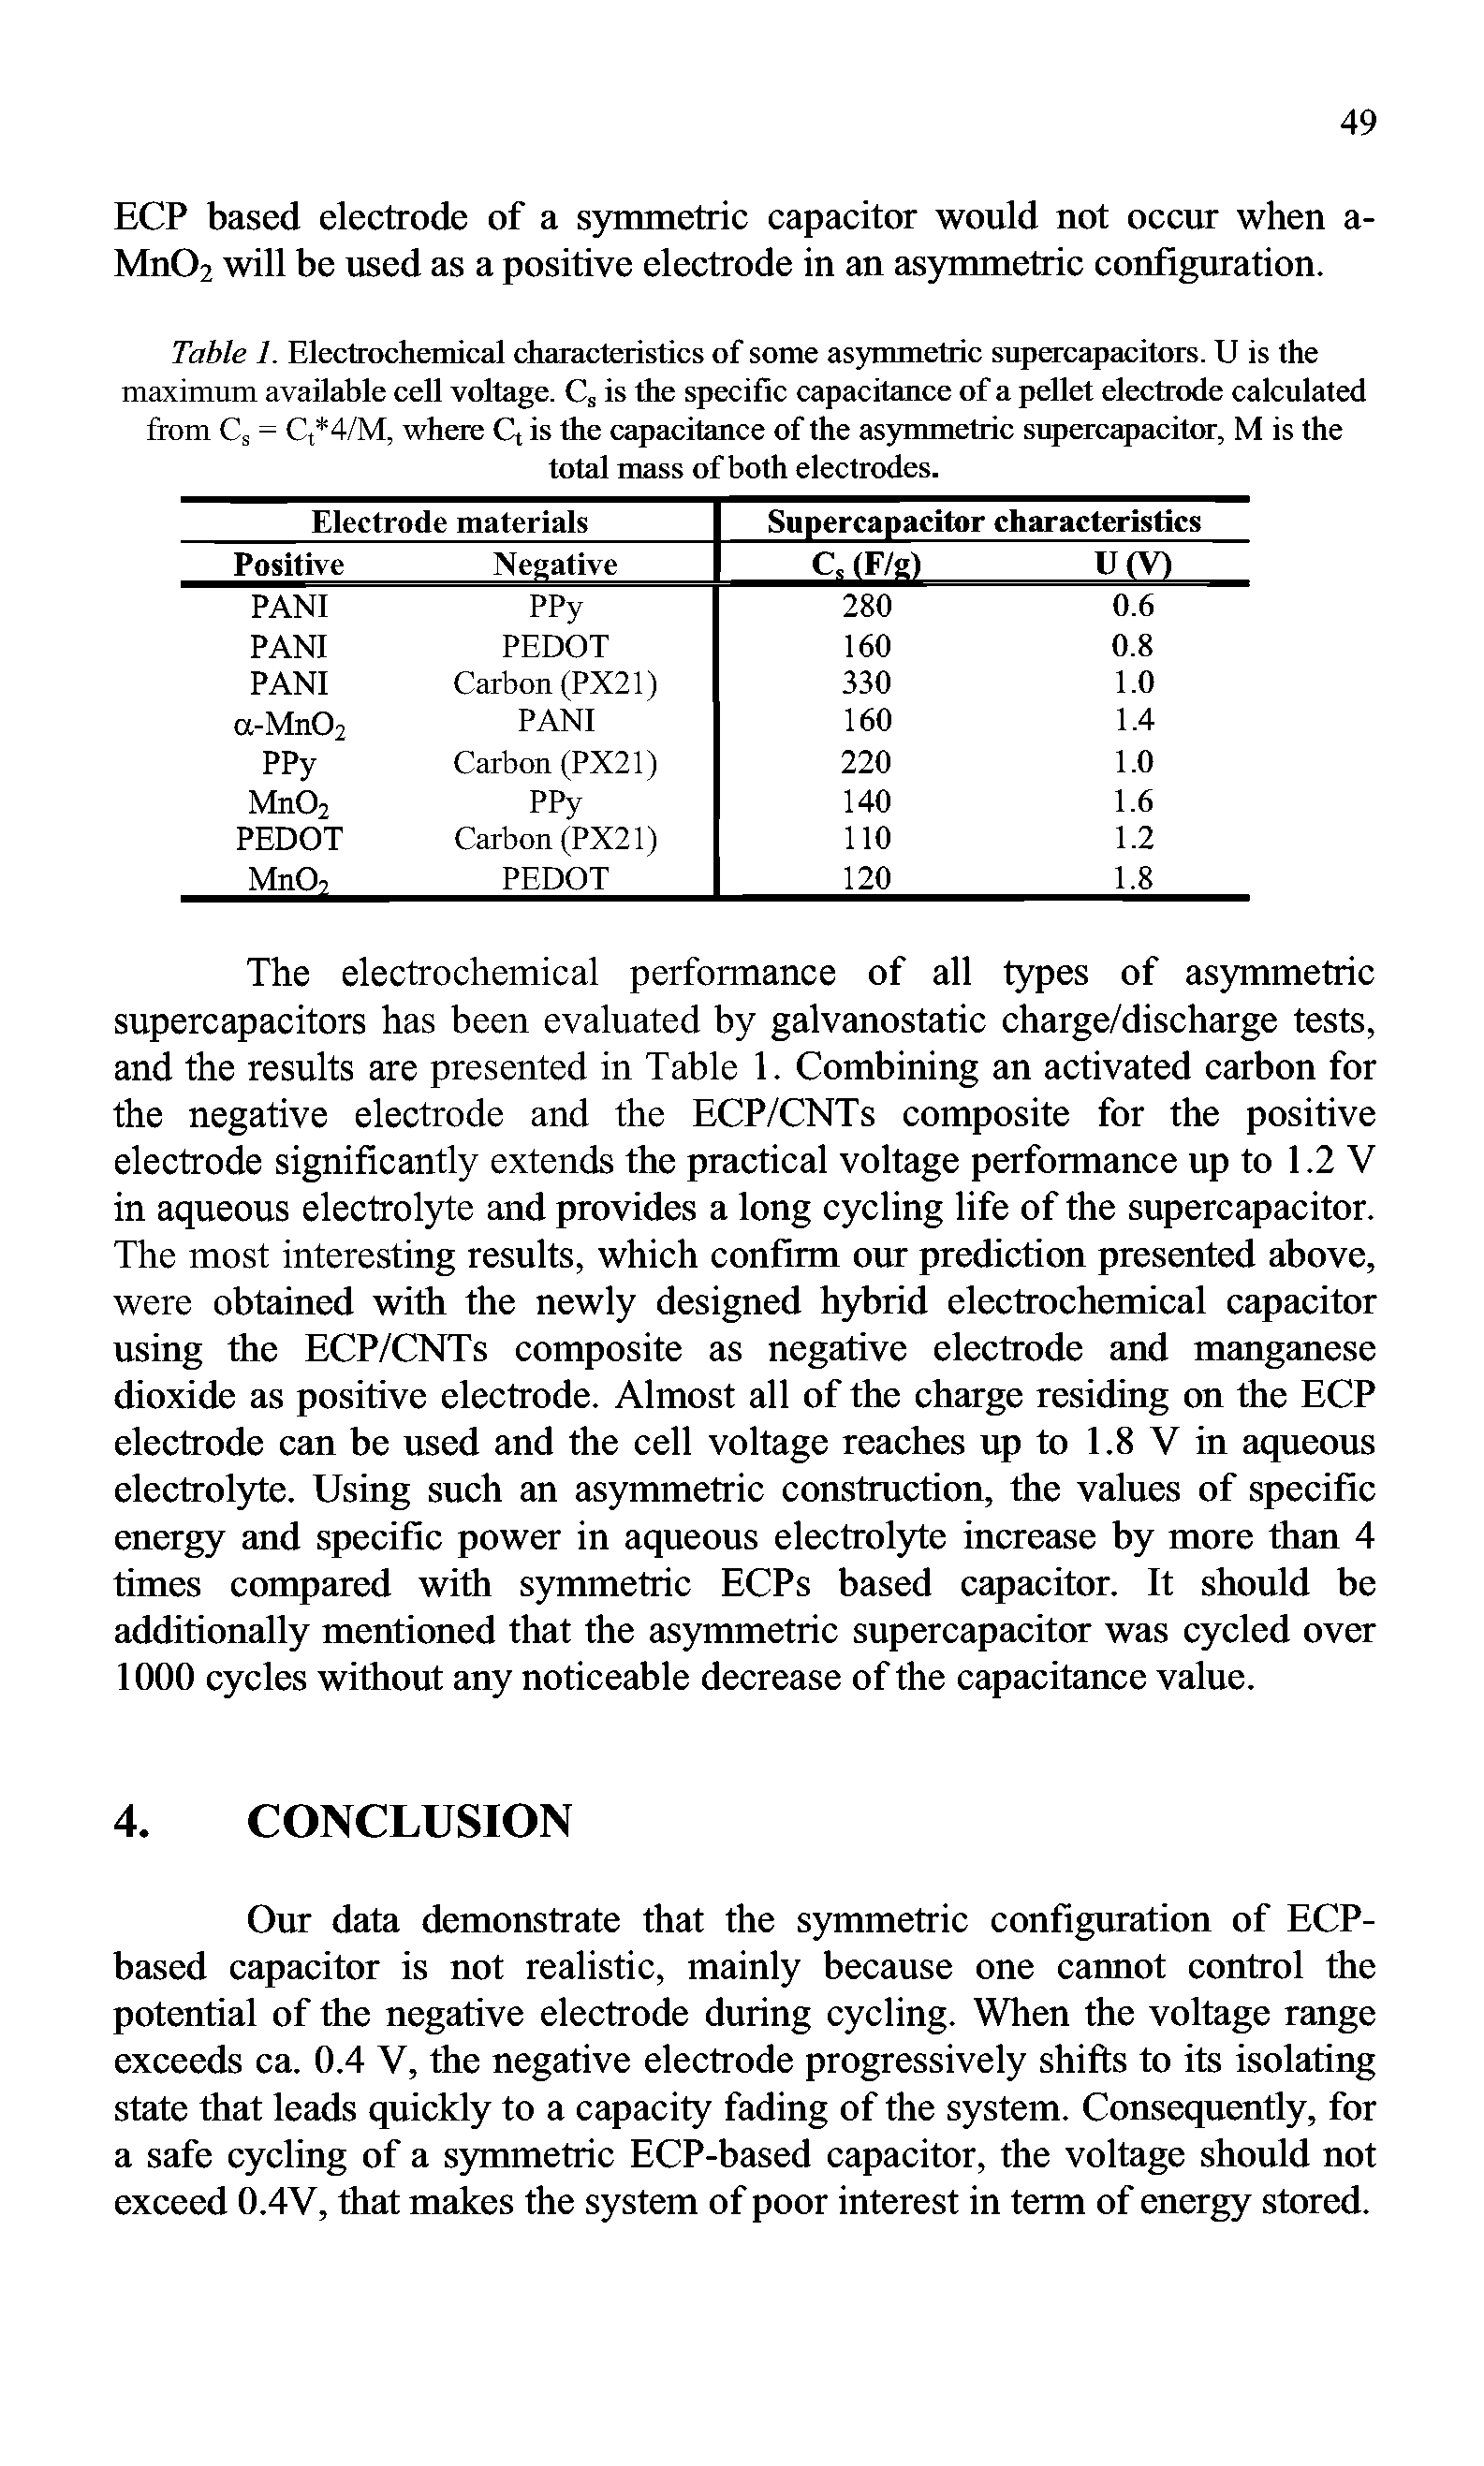 Table 1. Electrochemical characteristics of some asymmetric supercapacitors. U is the maximum available cell voltage. Cs is the specific capacitance of a pellet electrode calculated from Cs = Ct 4/M, where Q is the capacitance of the asymmetric supercapacitor, M is the total mass of both electrodes.